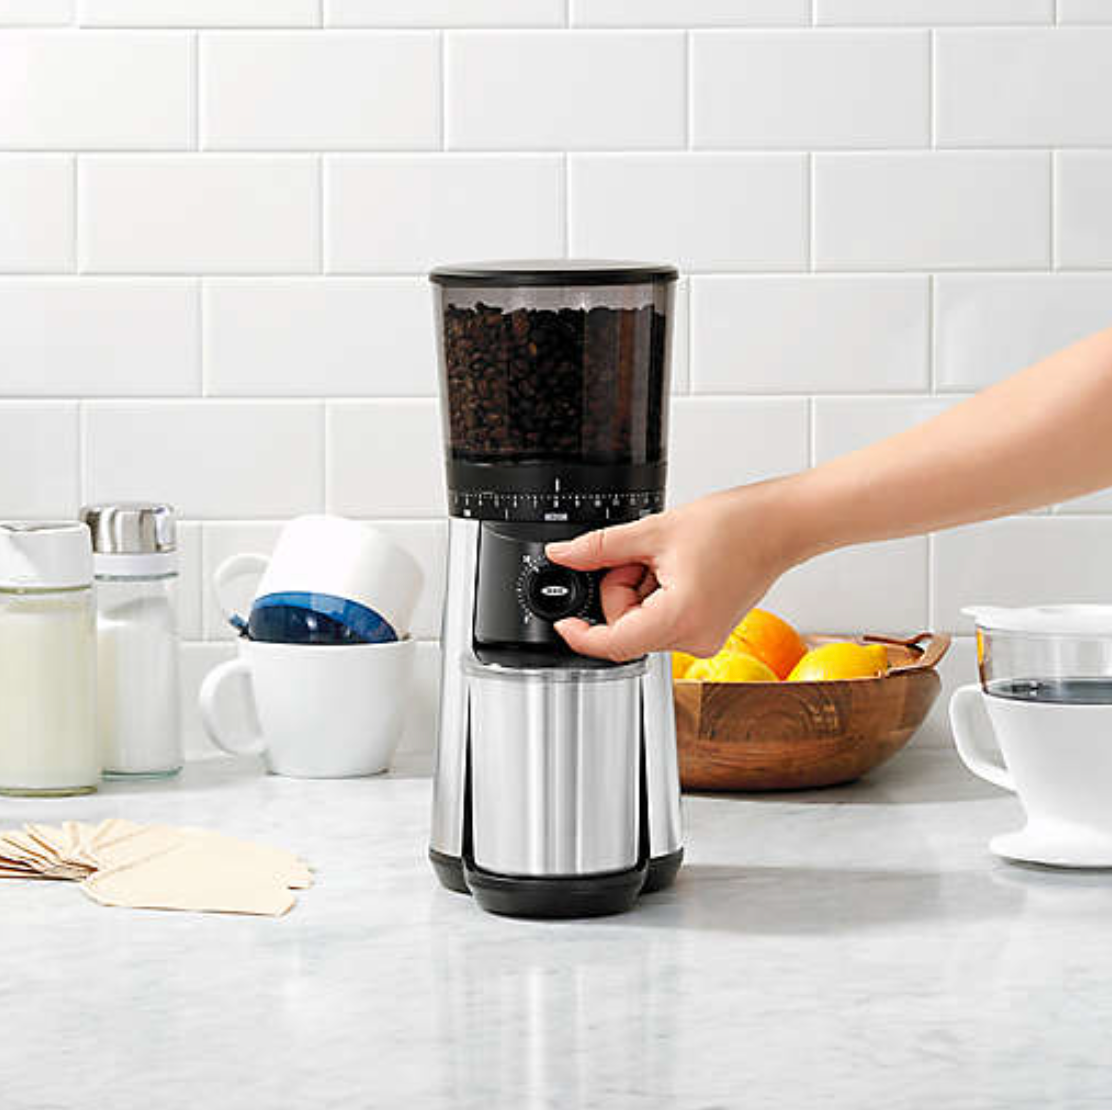 OXO Conical Burr Stainless Steel Coffee Grinder